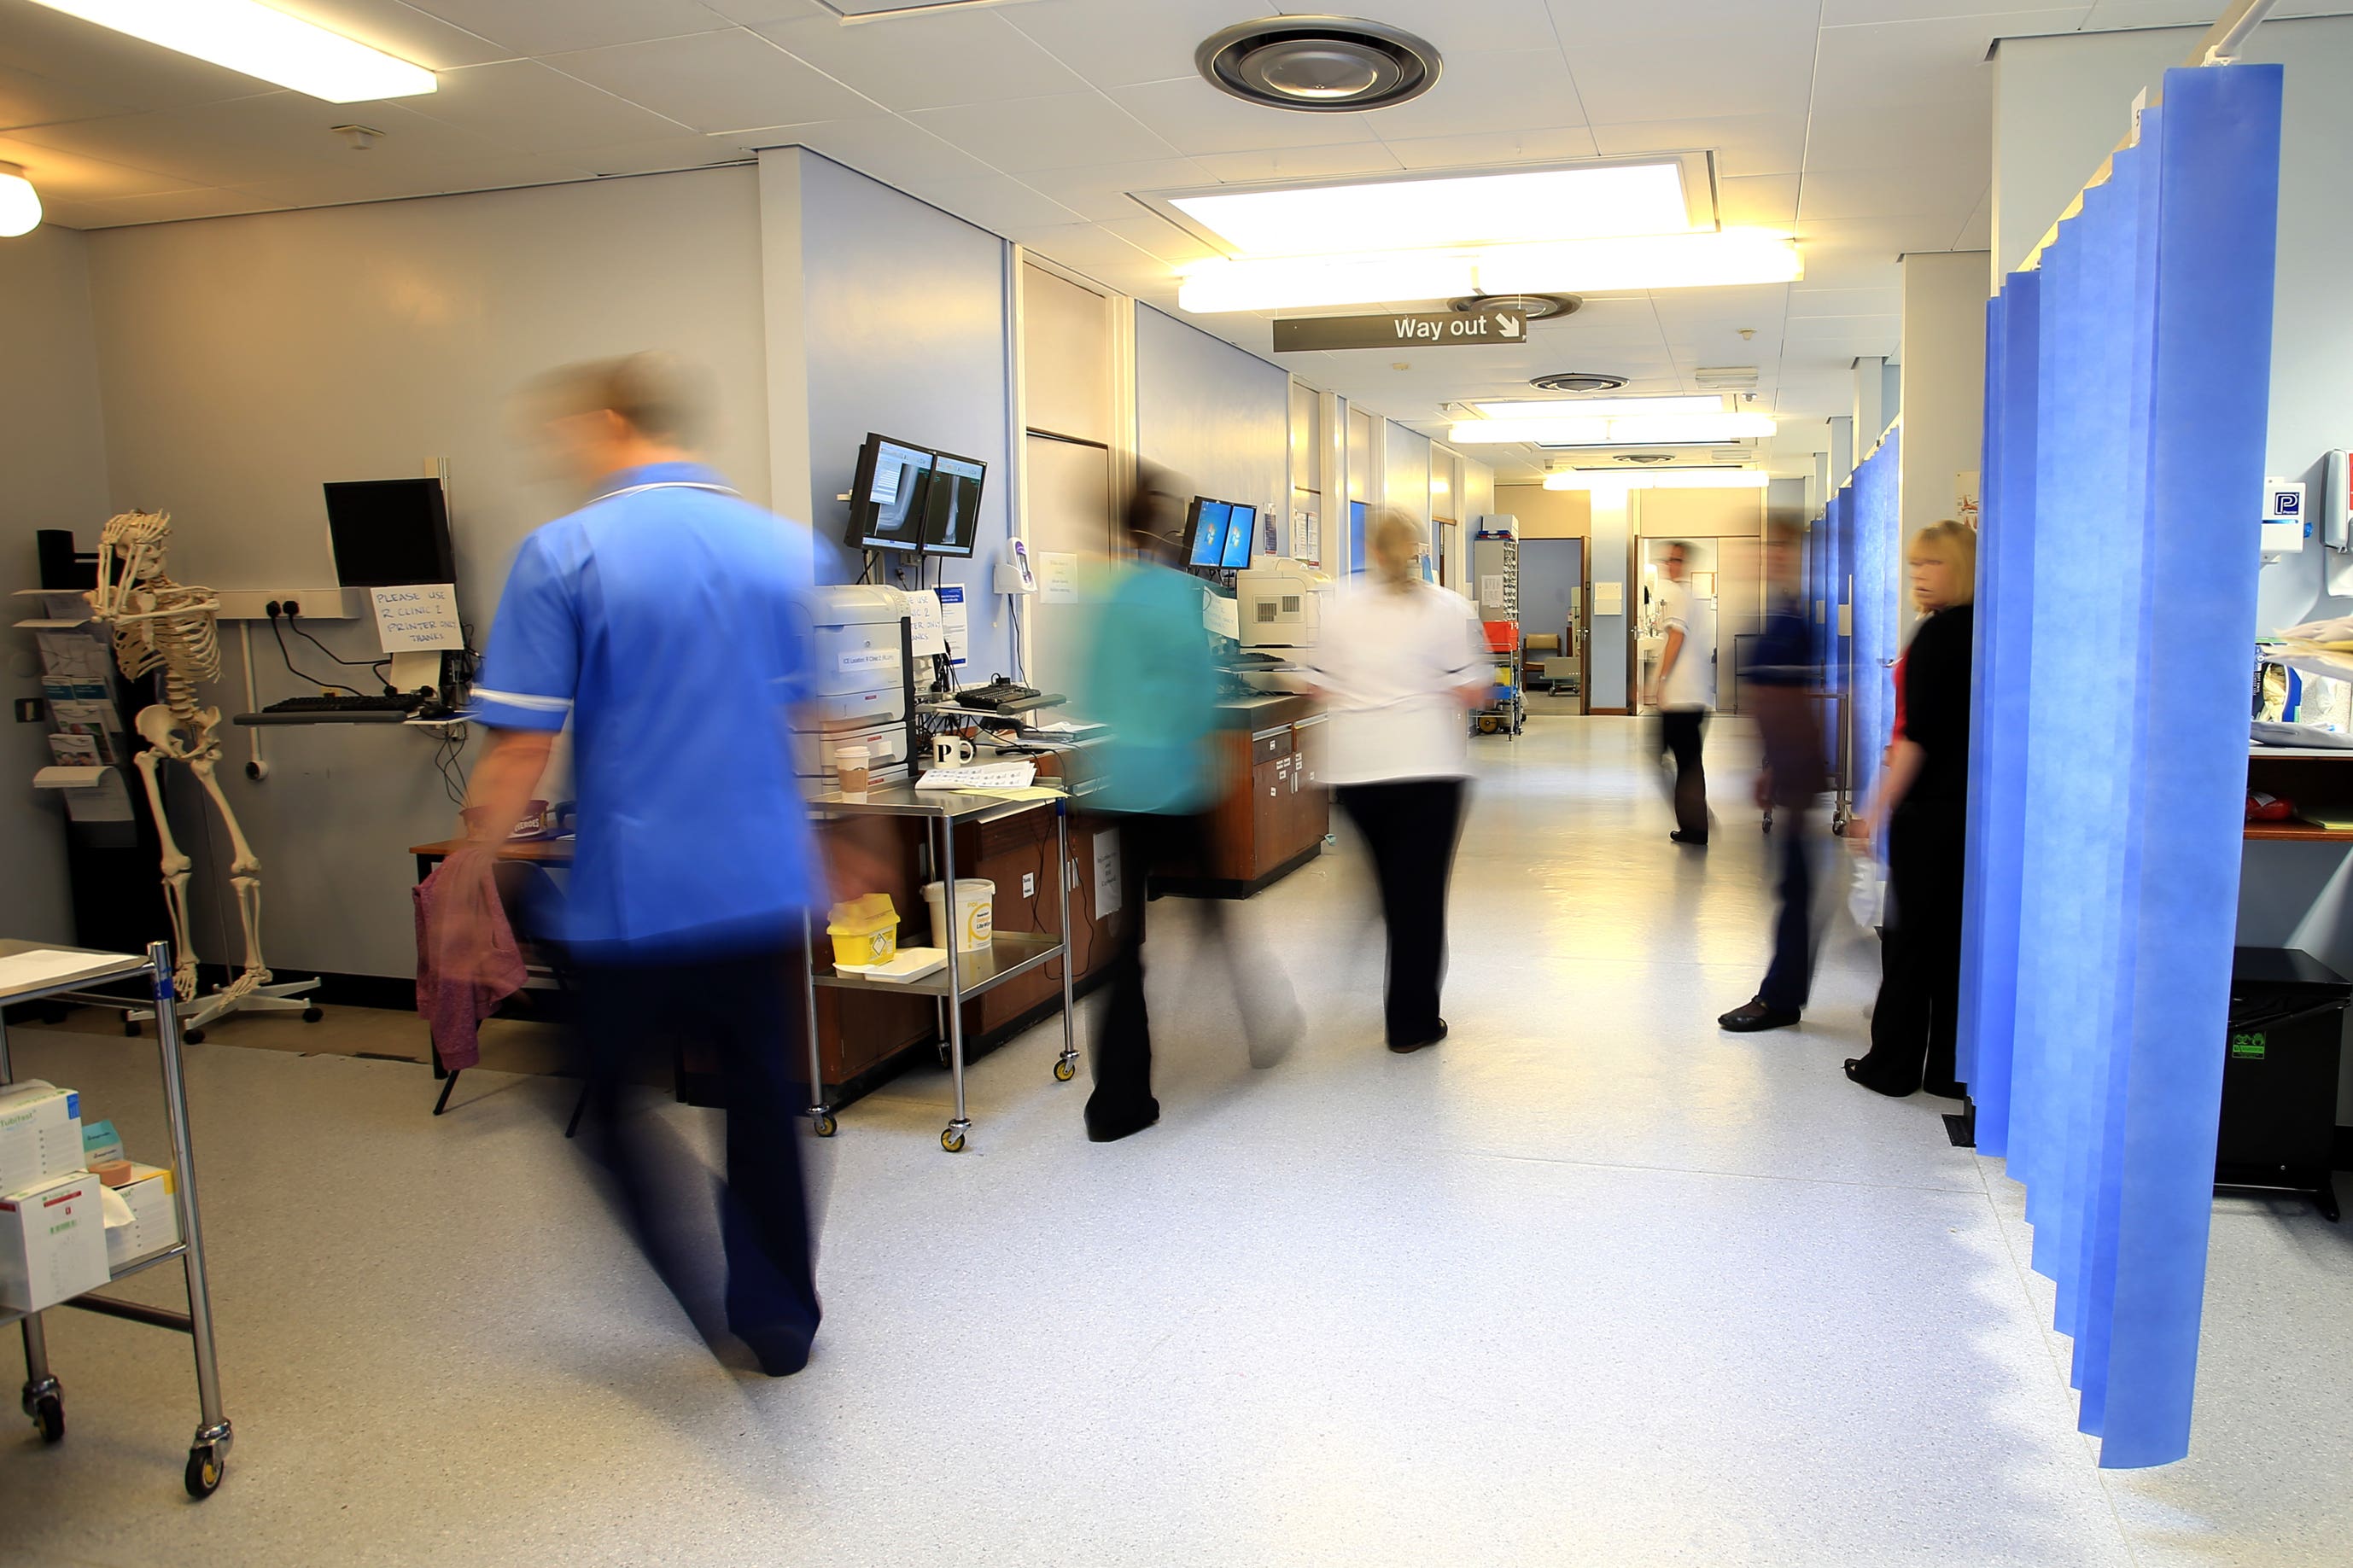 A NHS hospital ward where children with mental health conditions can be inappropriately admitted